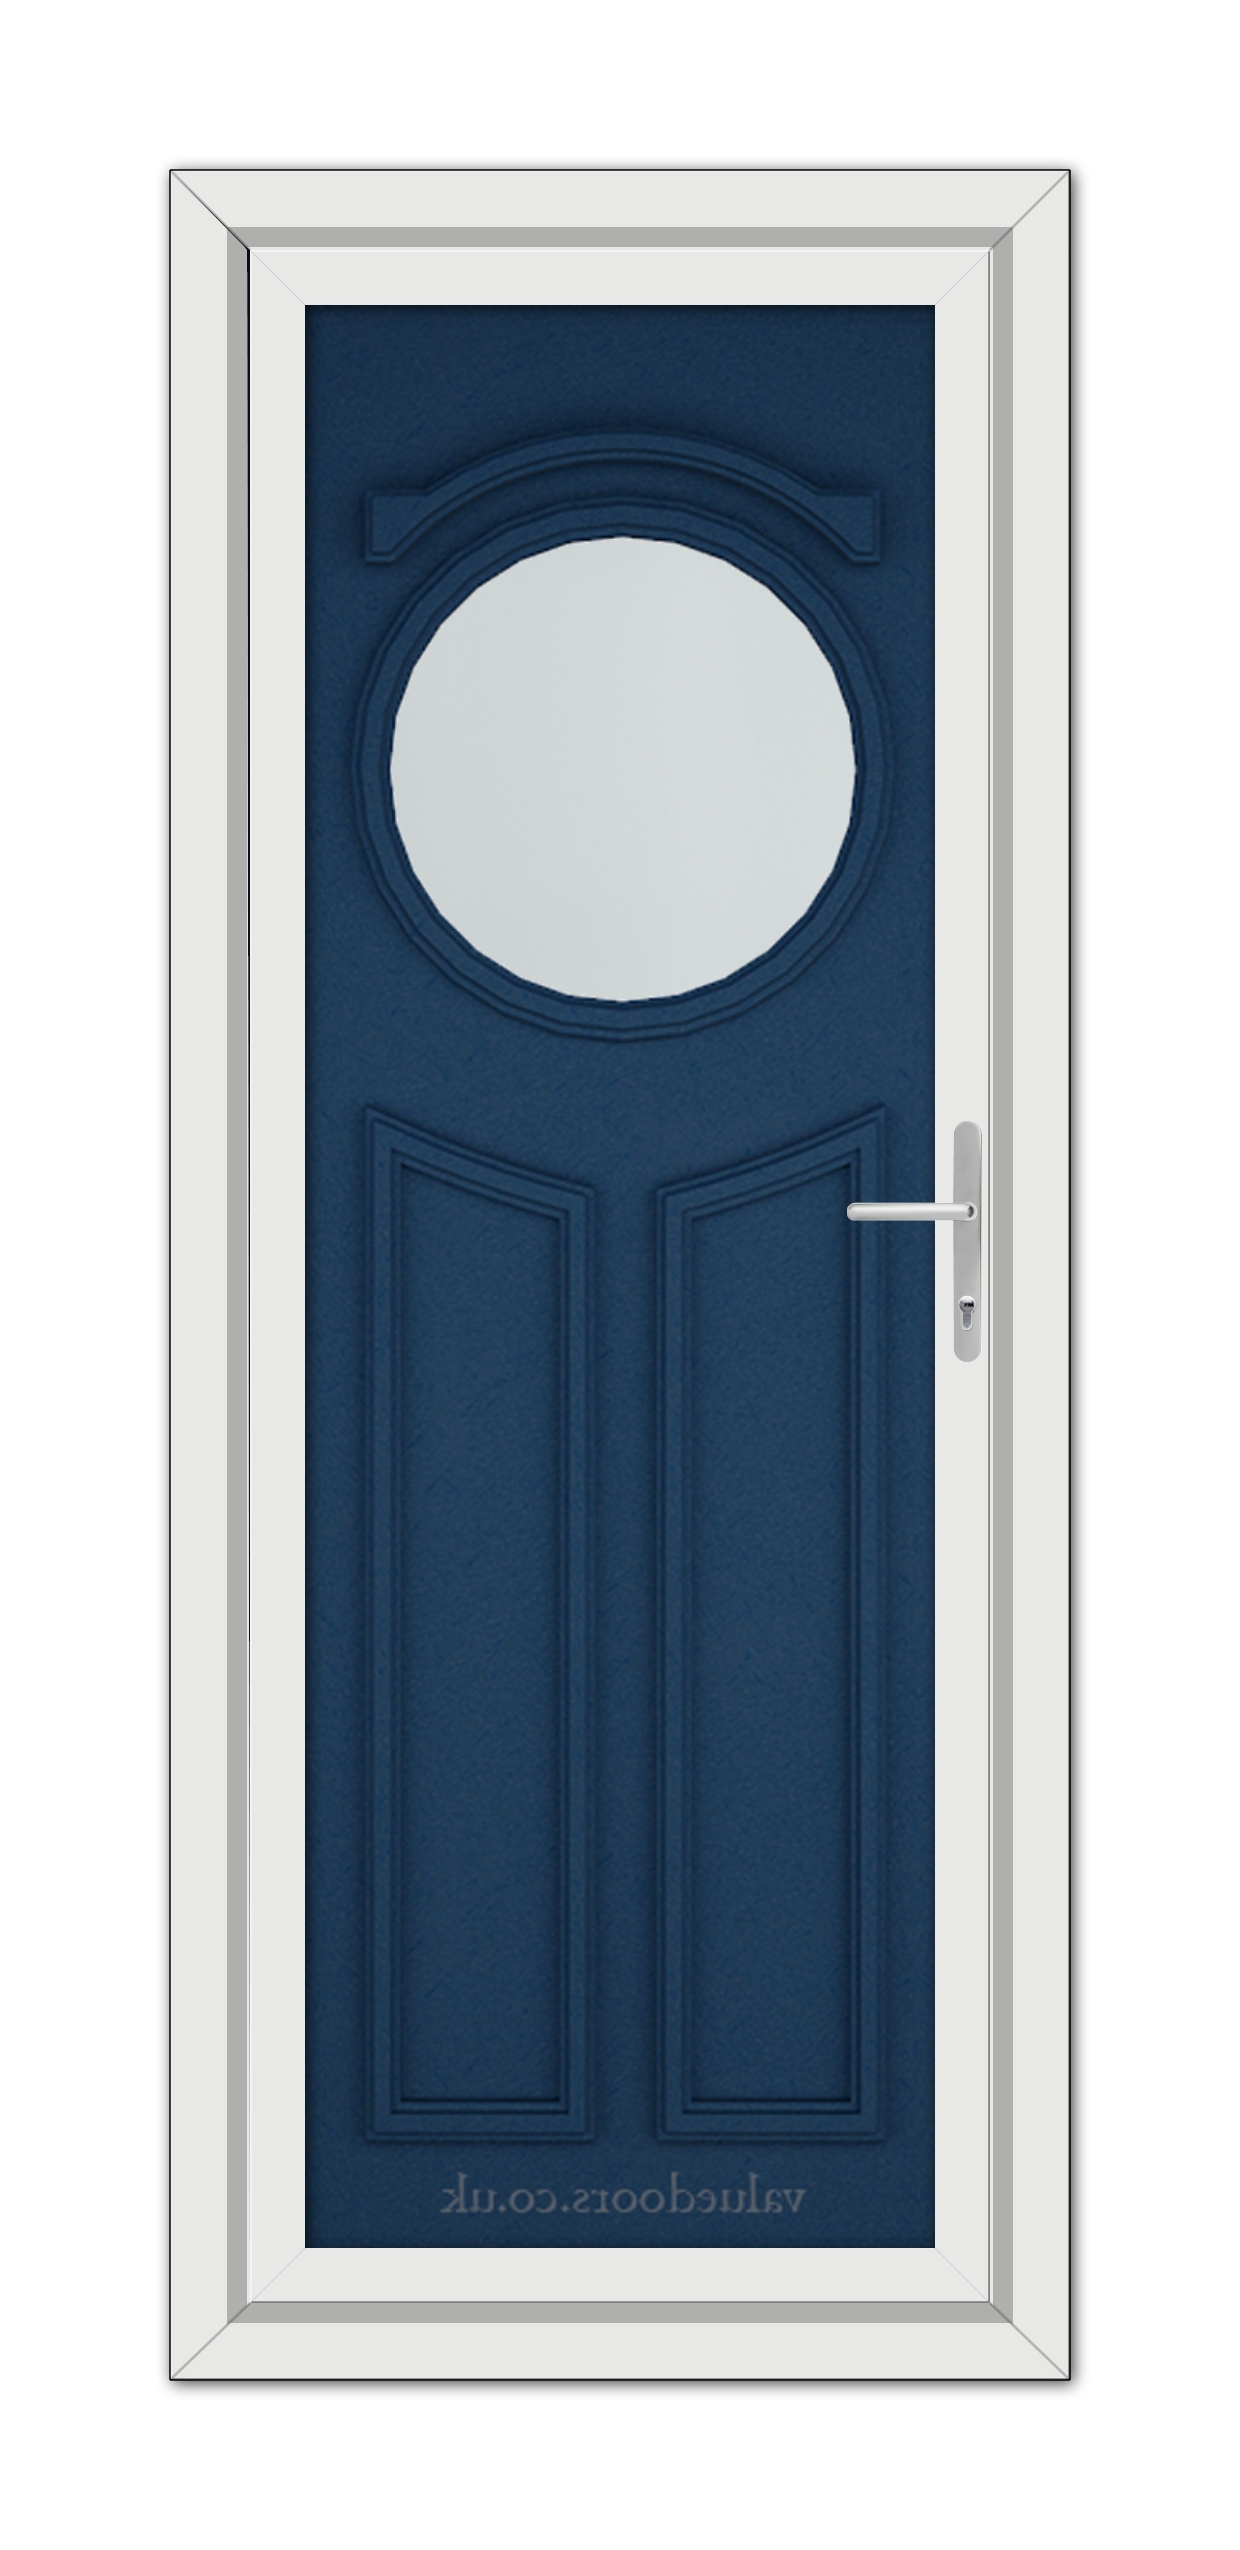 A Blue Blenheim uPVC Door with an oval window and a metal handle, set within a white frame.